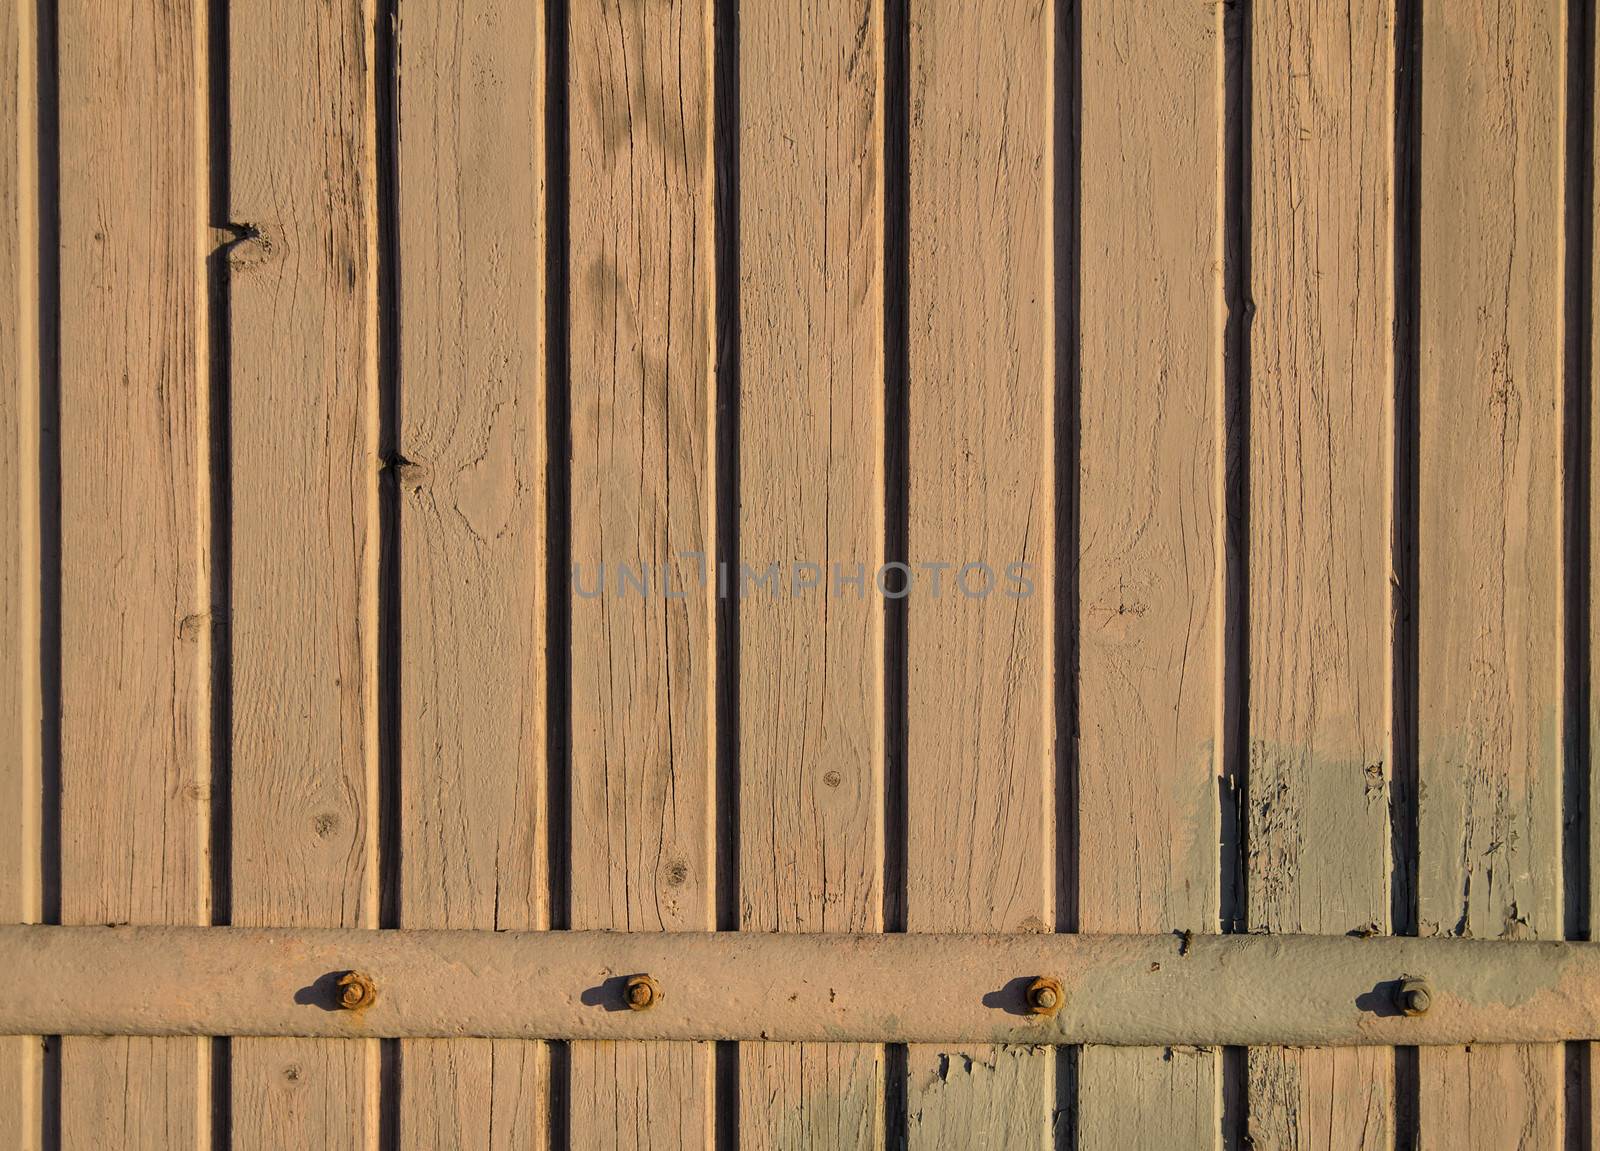 Worn wooden background with a long rusty hinge